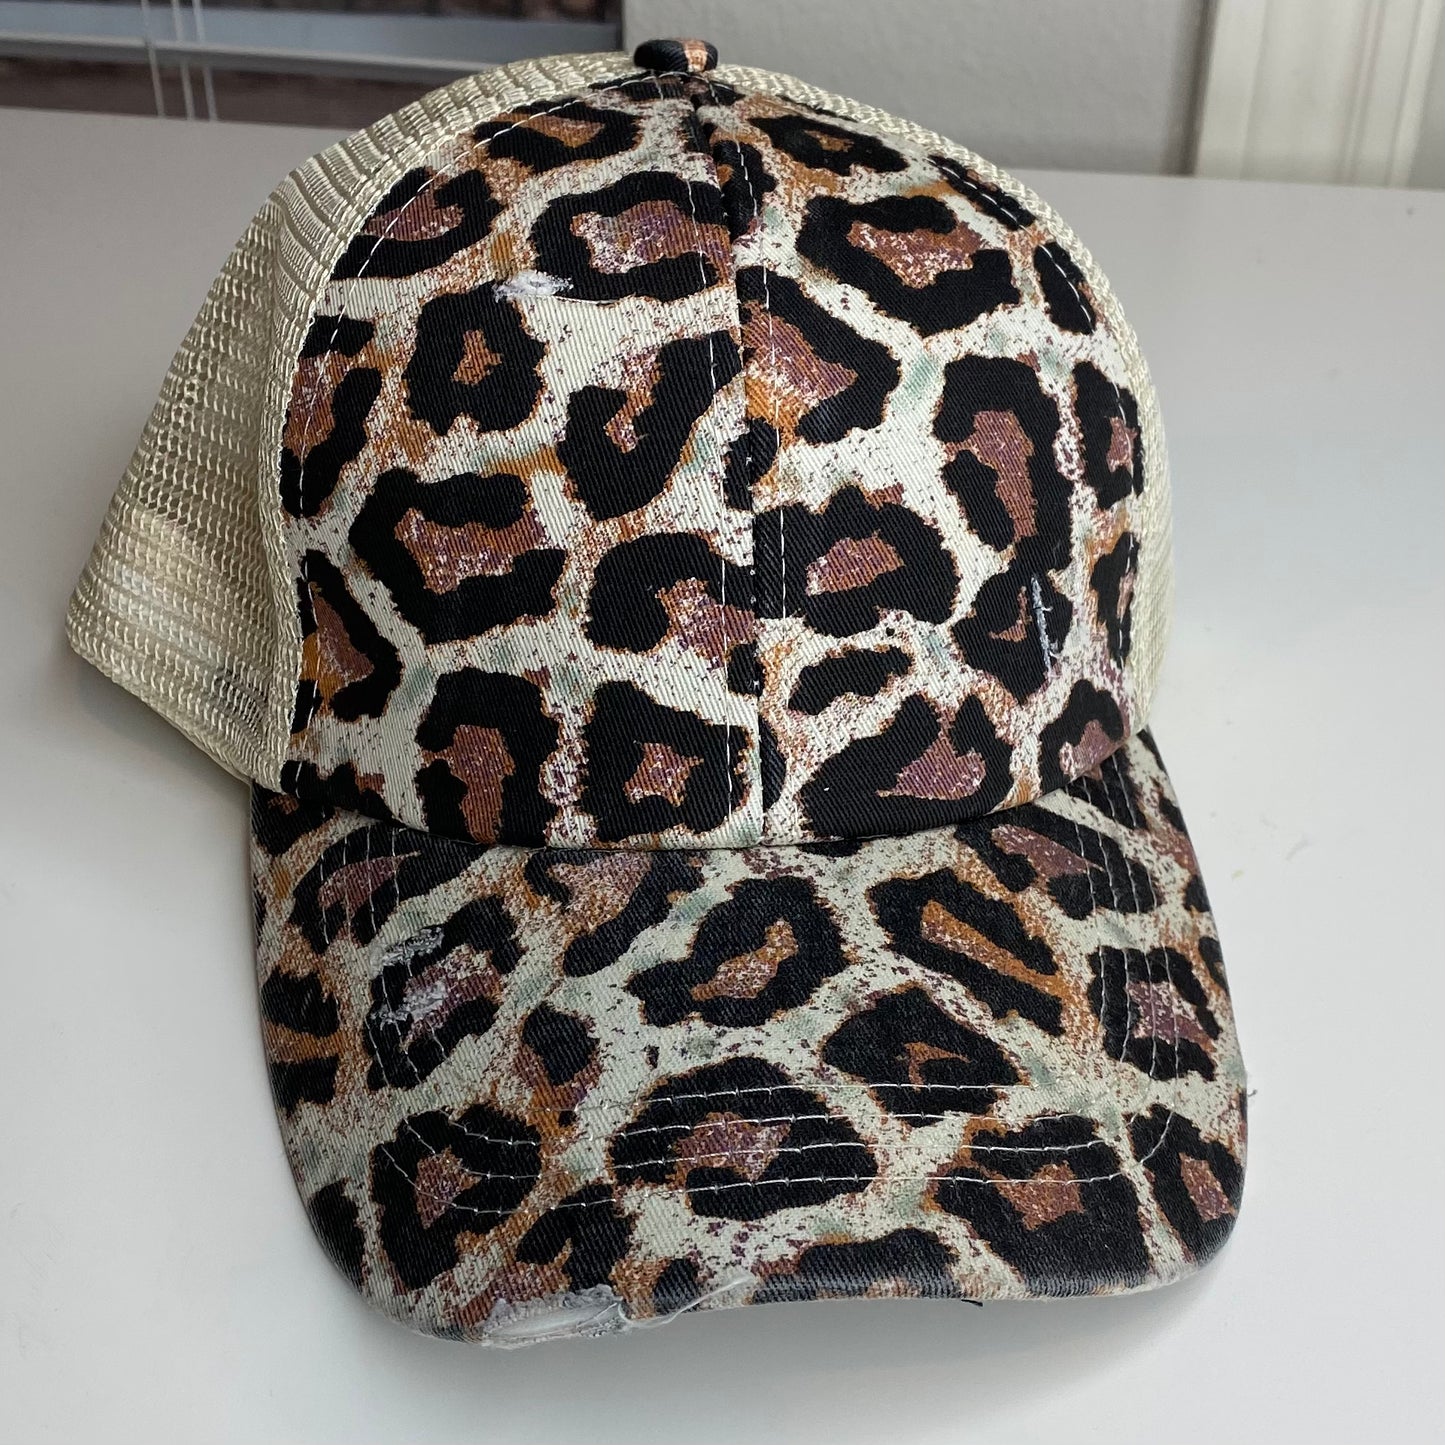 Leopard Cap with Tan mesh backing